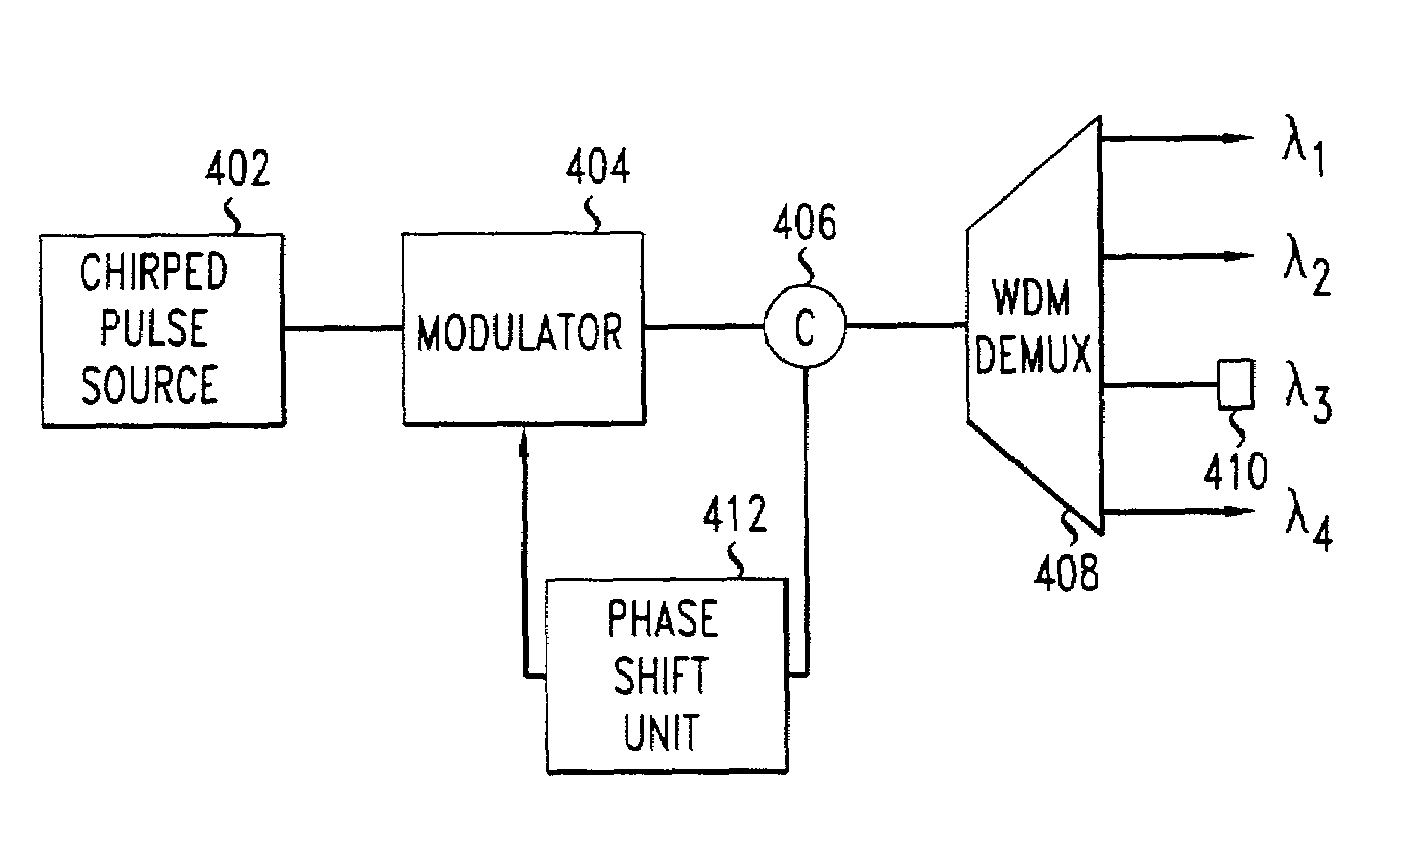 Modulation phase shift to compensate for optical passband shift